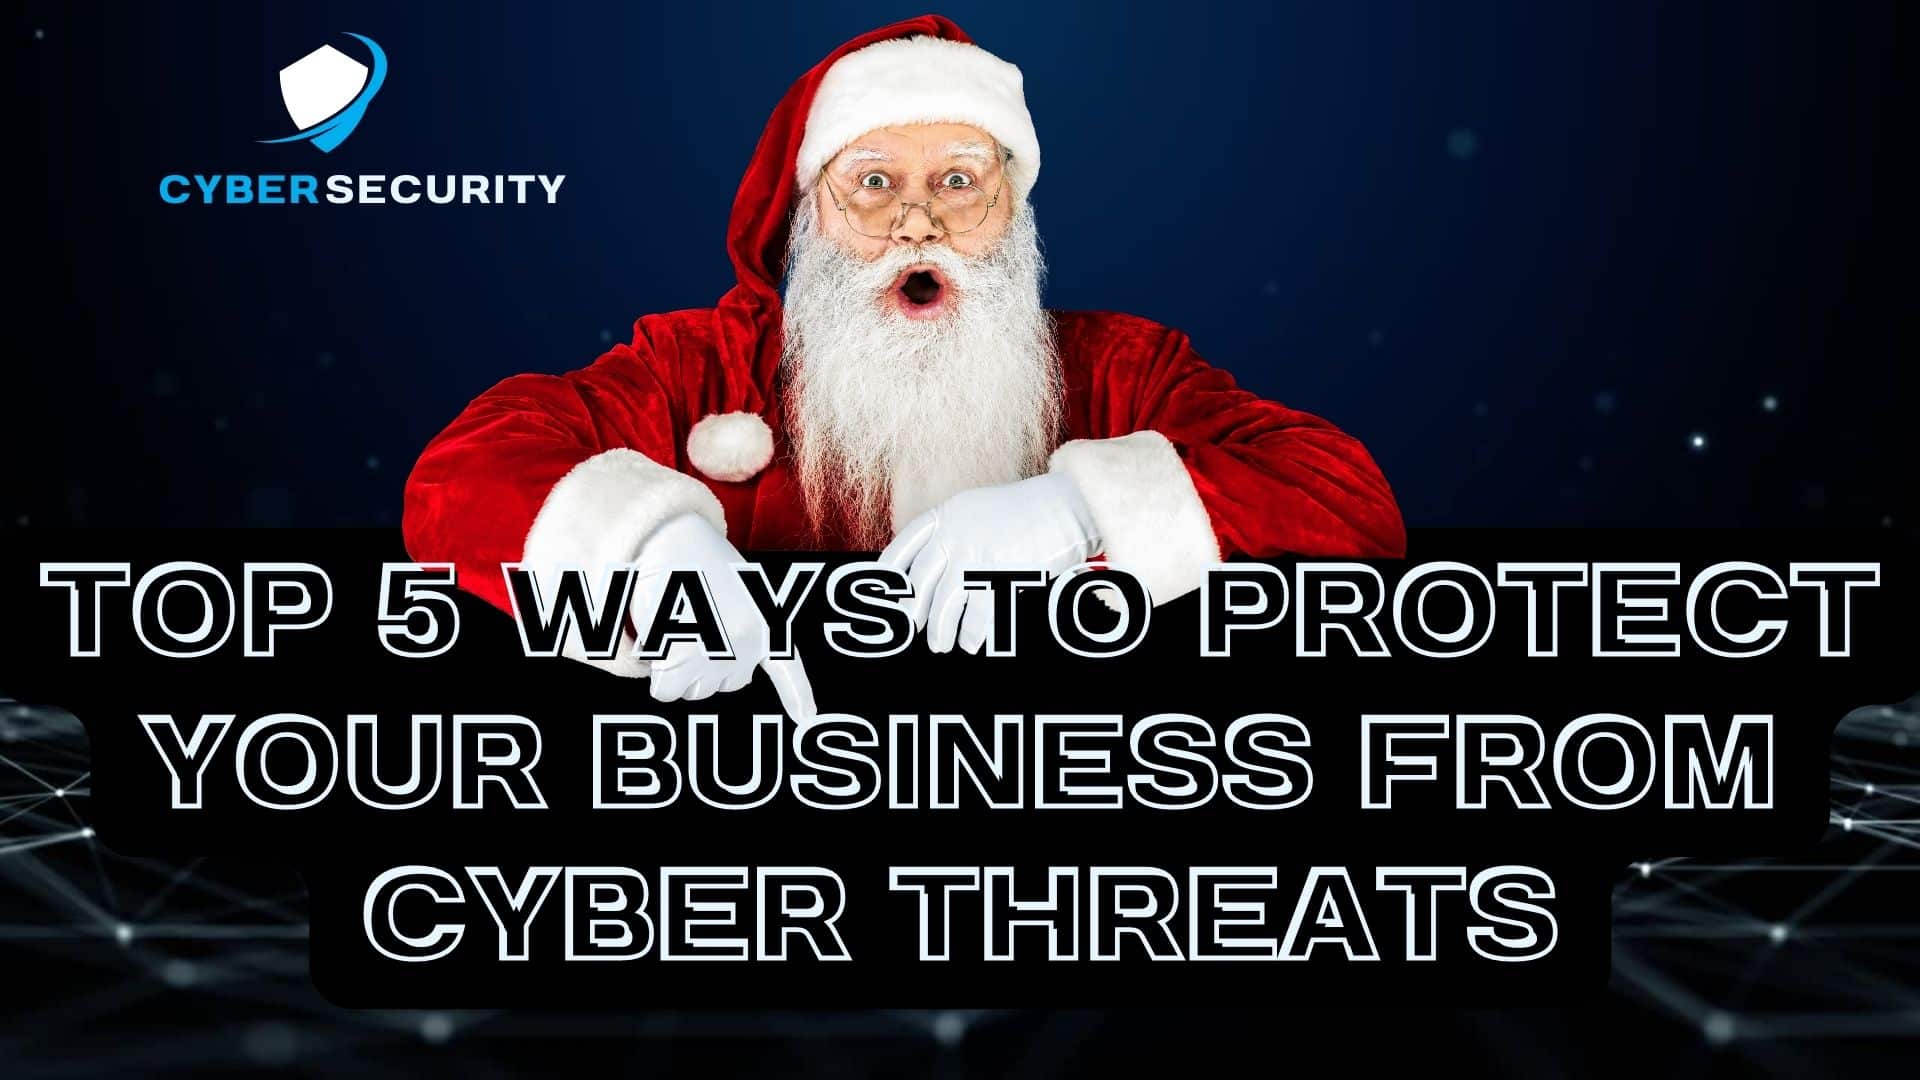 Protect yourself from Cyber Threats this holiday, Santa points to the 5 tips text.